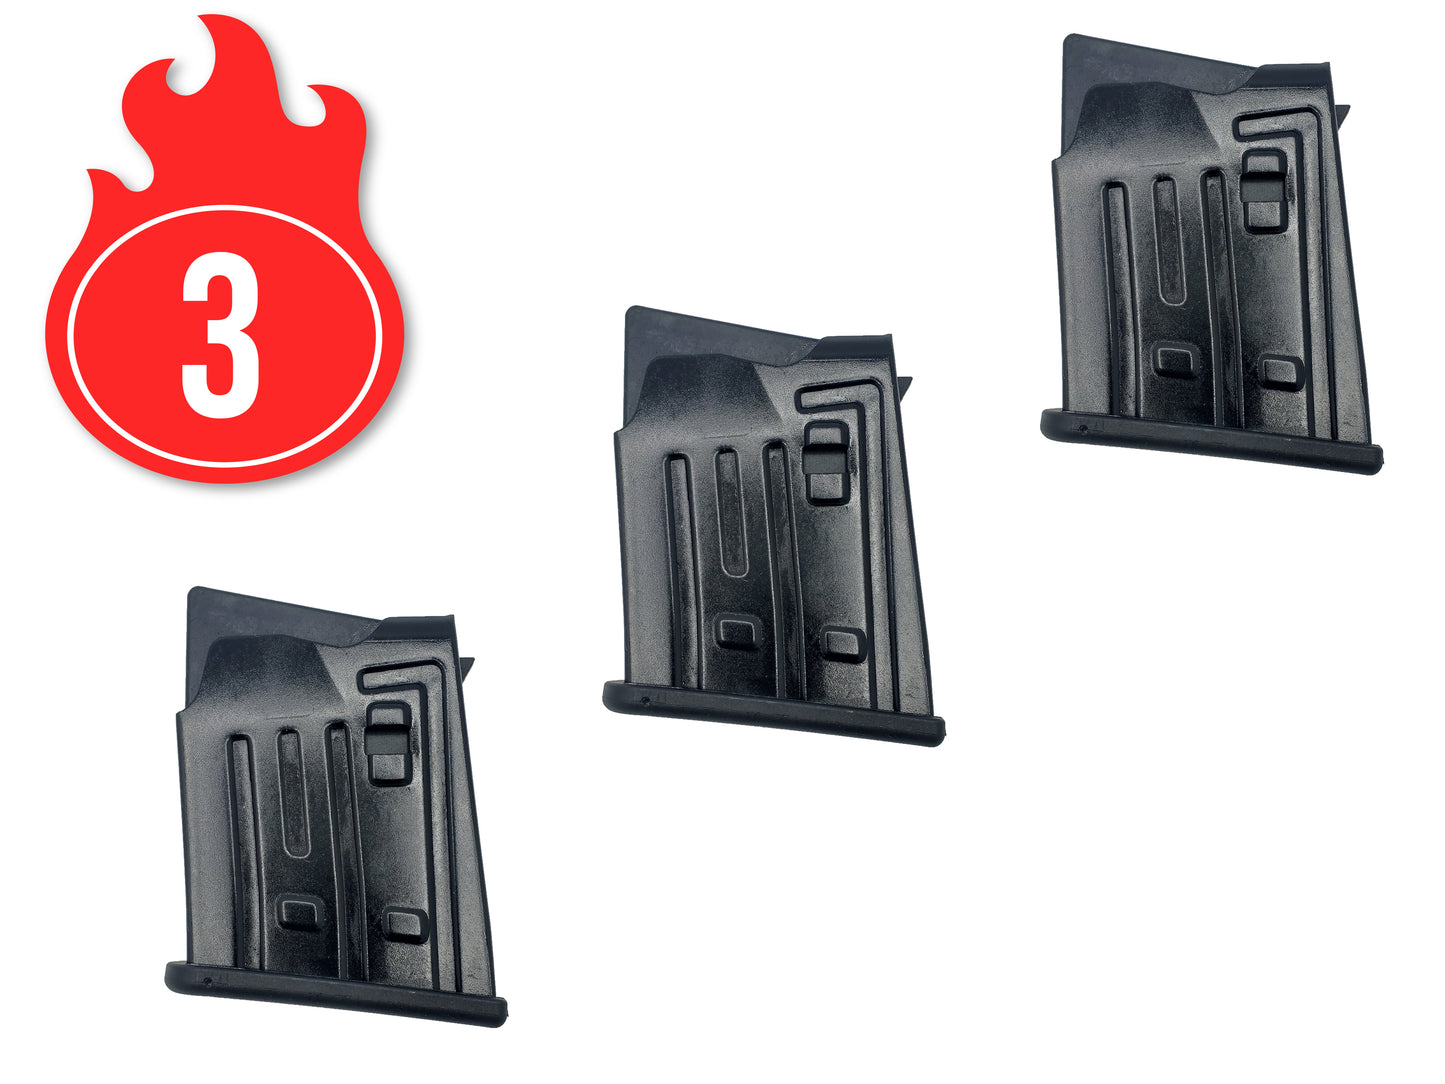 FBS 12 BULLPUP 12 GA, 2 ROUND MAGAZINE, NEW, FAST SHIPPING!